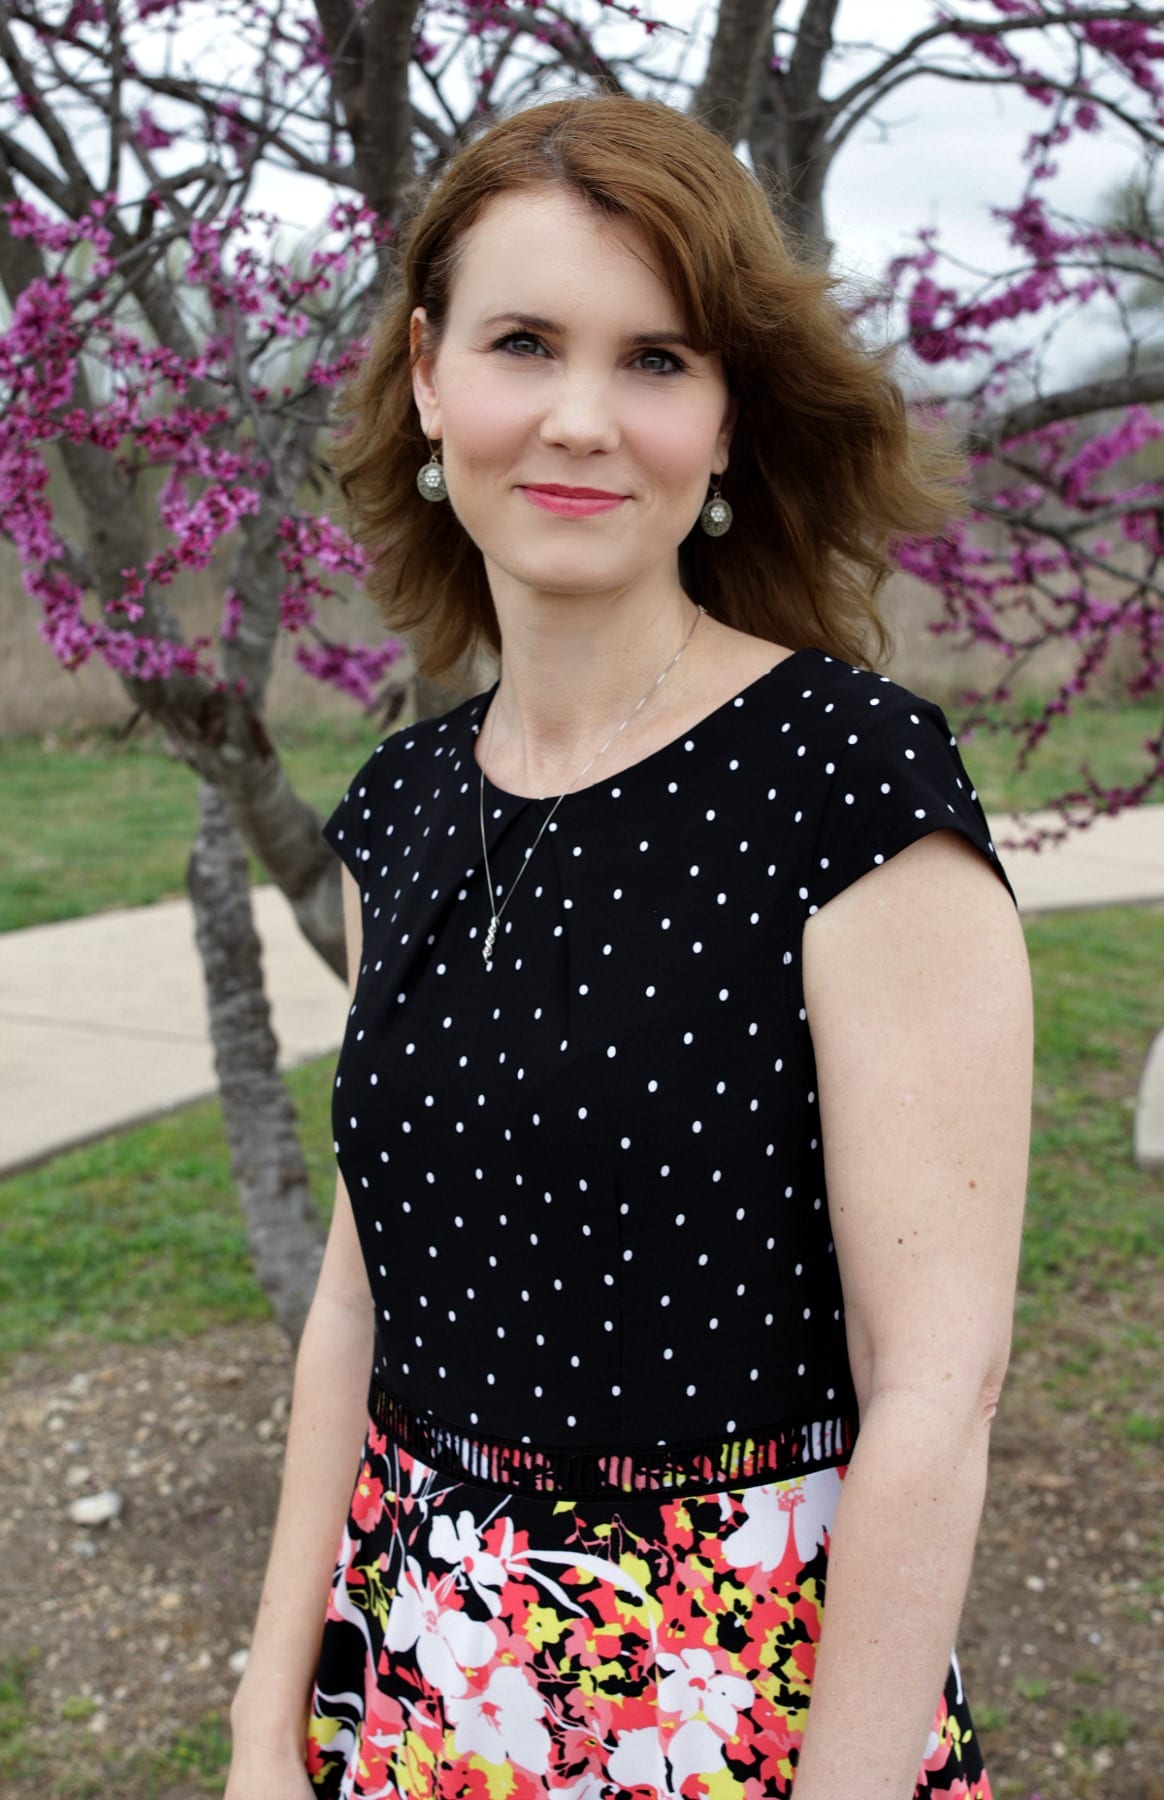 Easter dress from Metrostyle -- This Mixed Media Dress is the easiest way to mix up prints. The bodice features polka-dots and the skirt is floral. It's all one piece and so comfortable and flattering.